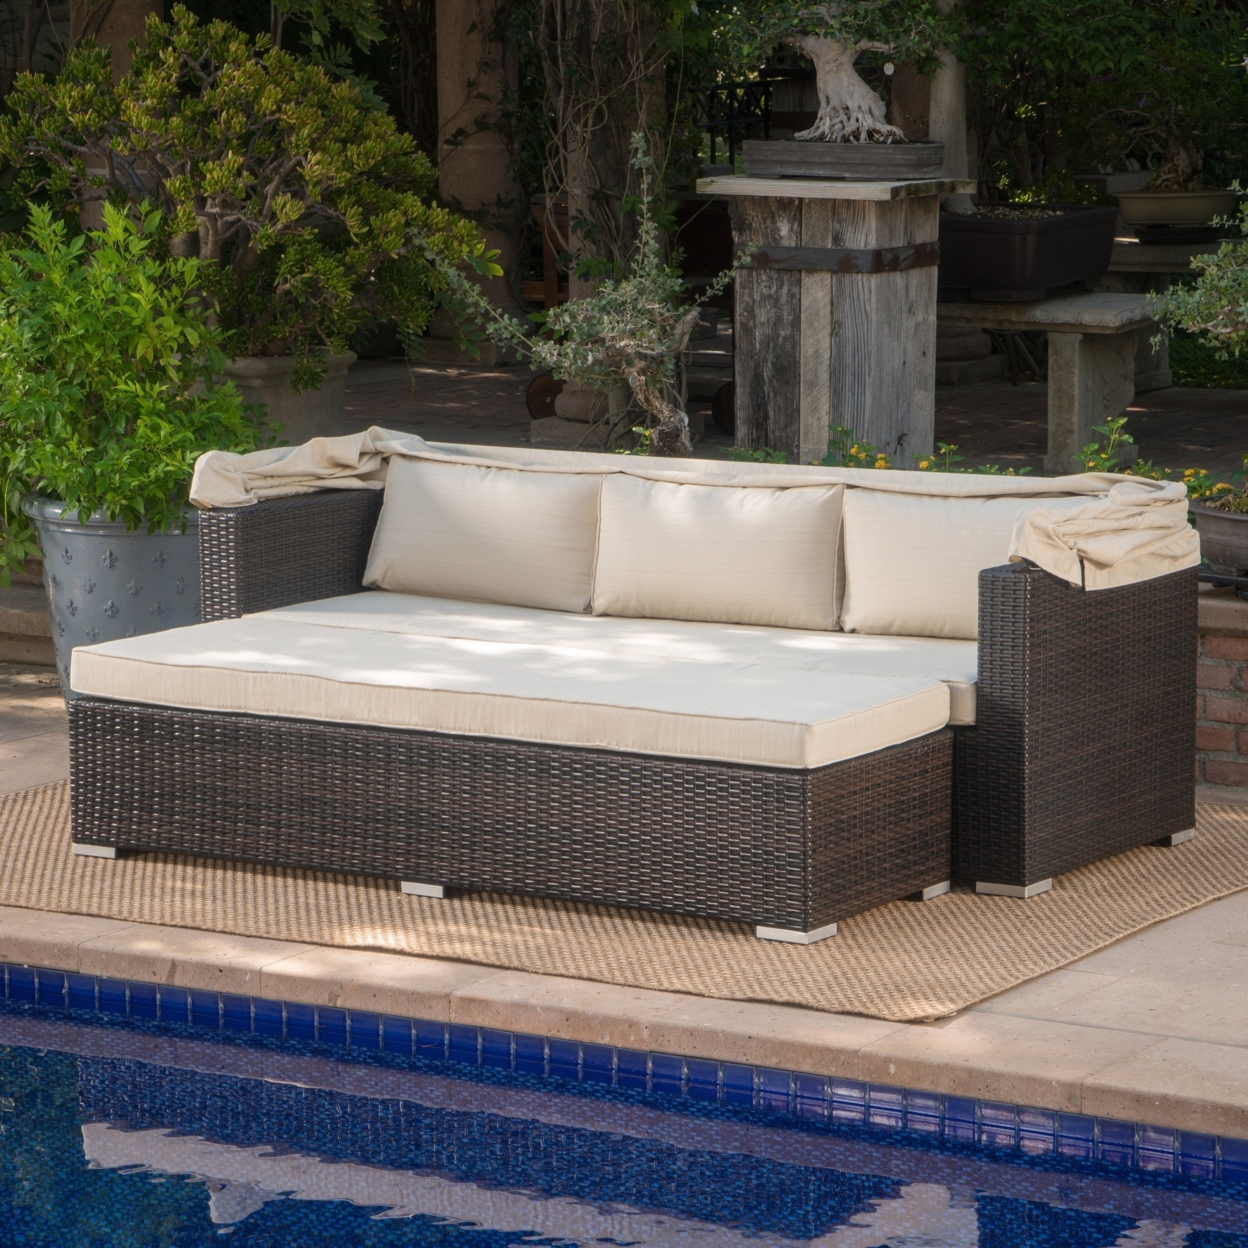 Grayson Outdoor Aluminum Framed Wicker Sofa With Water Resistant Canopy - Beige, Brown Wicker